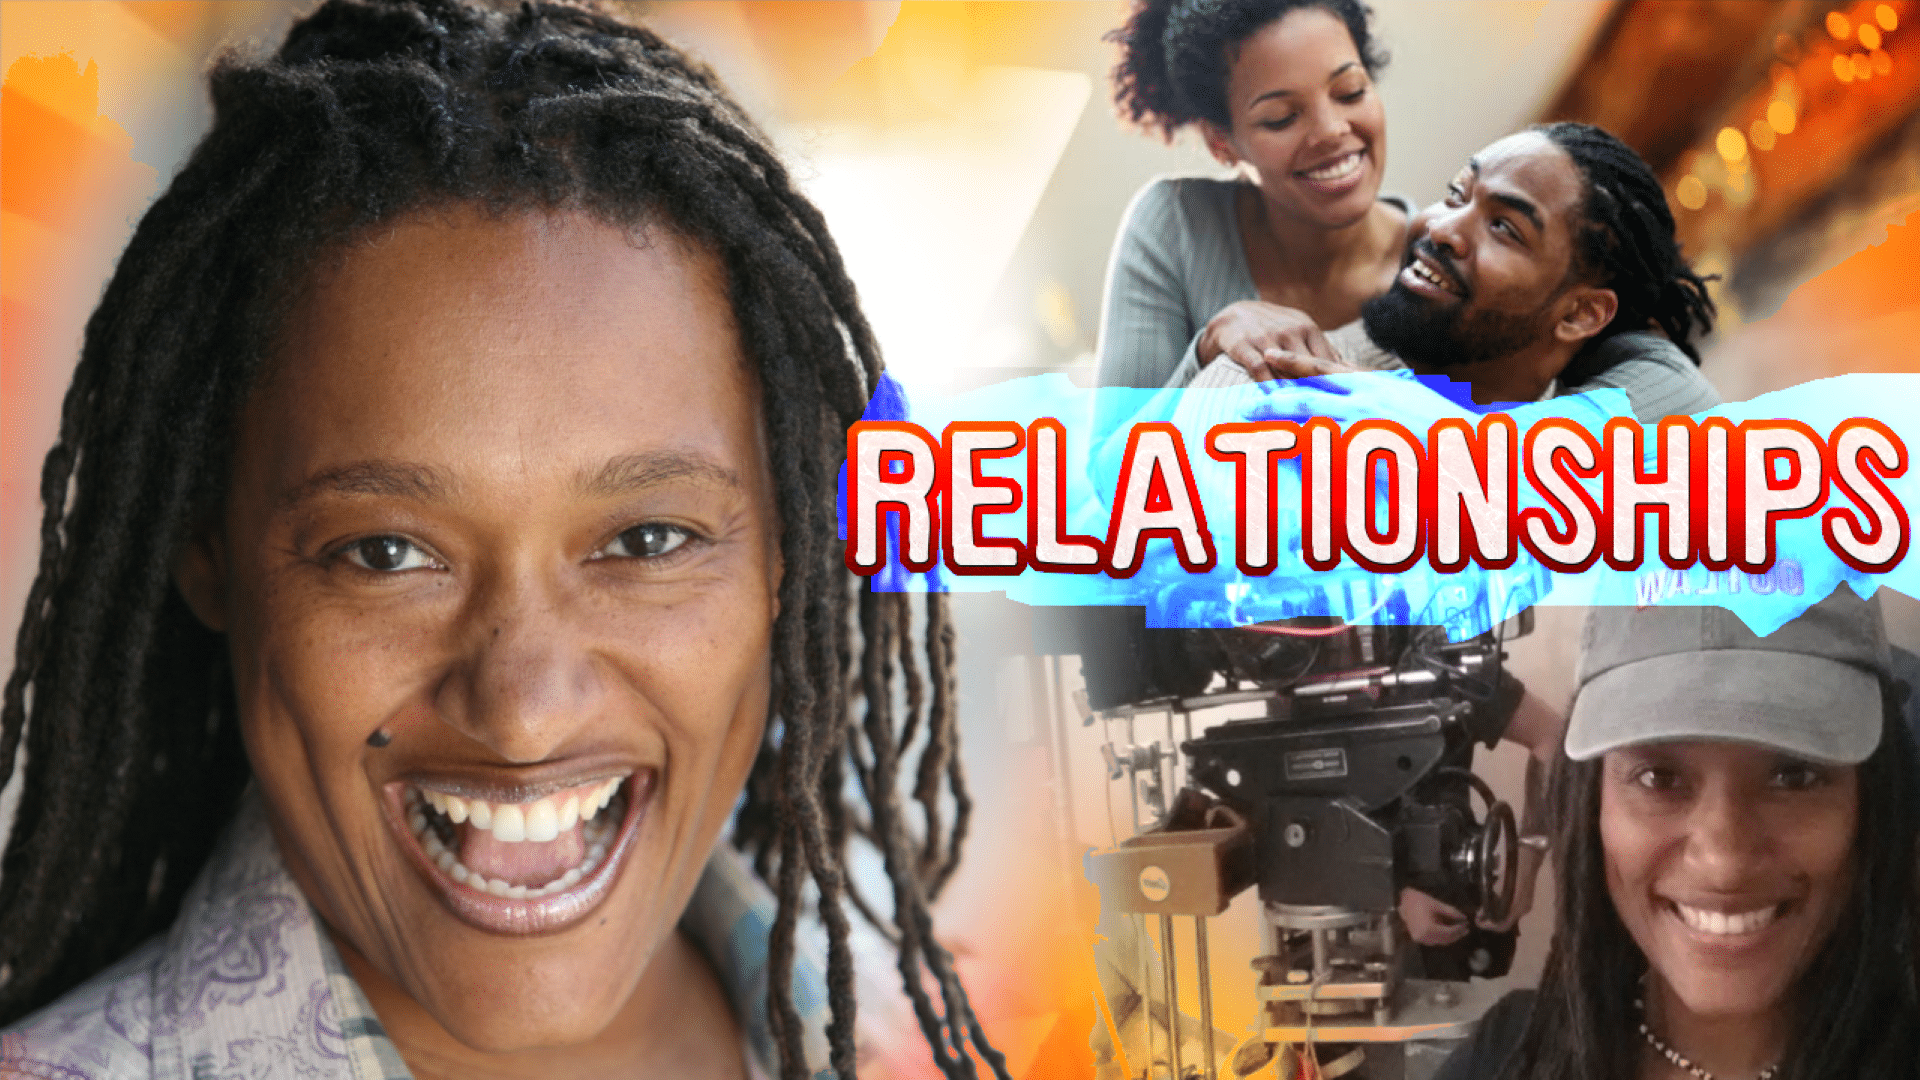 Filmmaker Nnegest Asks What Can Modern Women Do To Handle Relationships In A Feminine Way